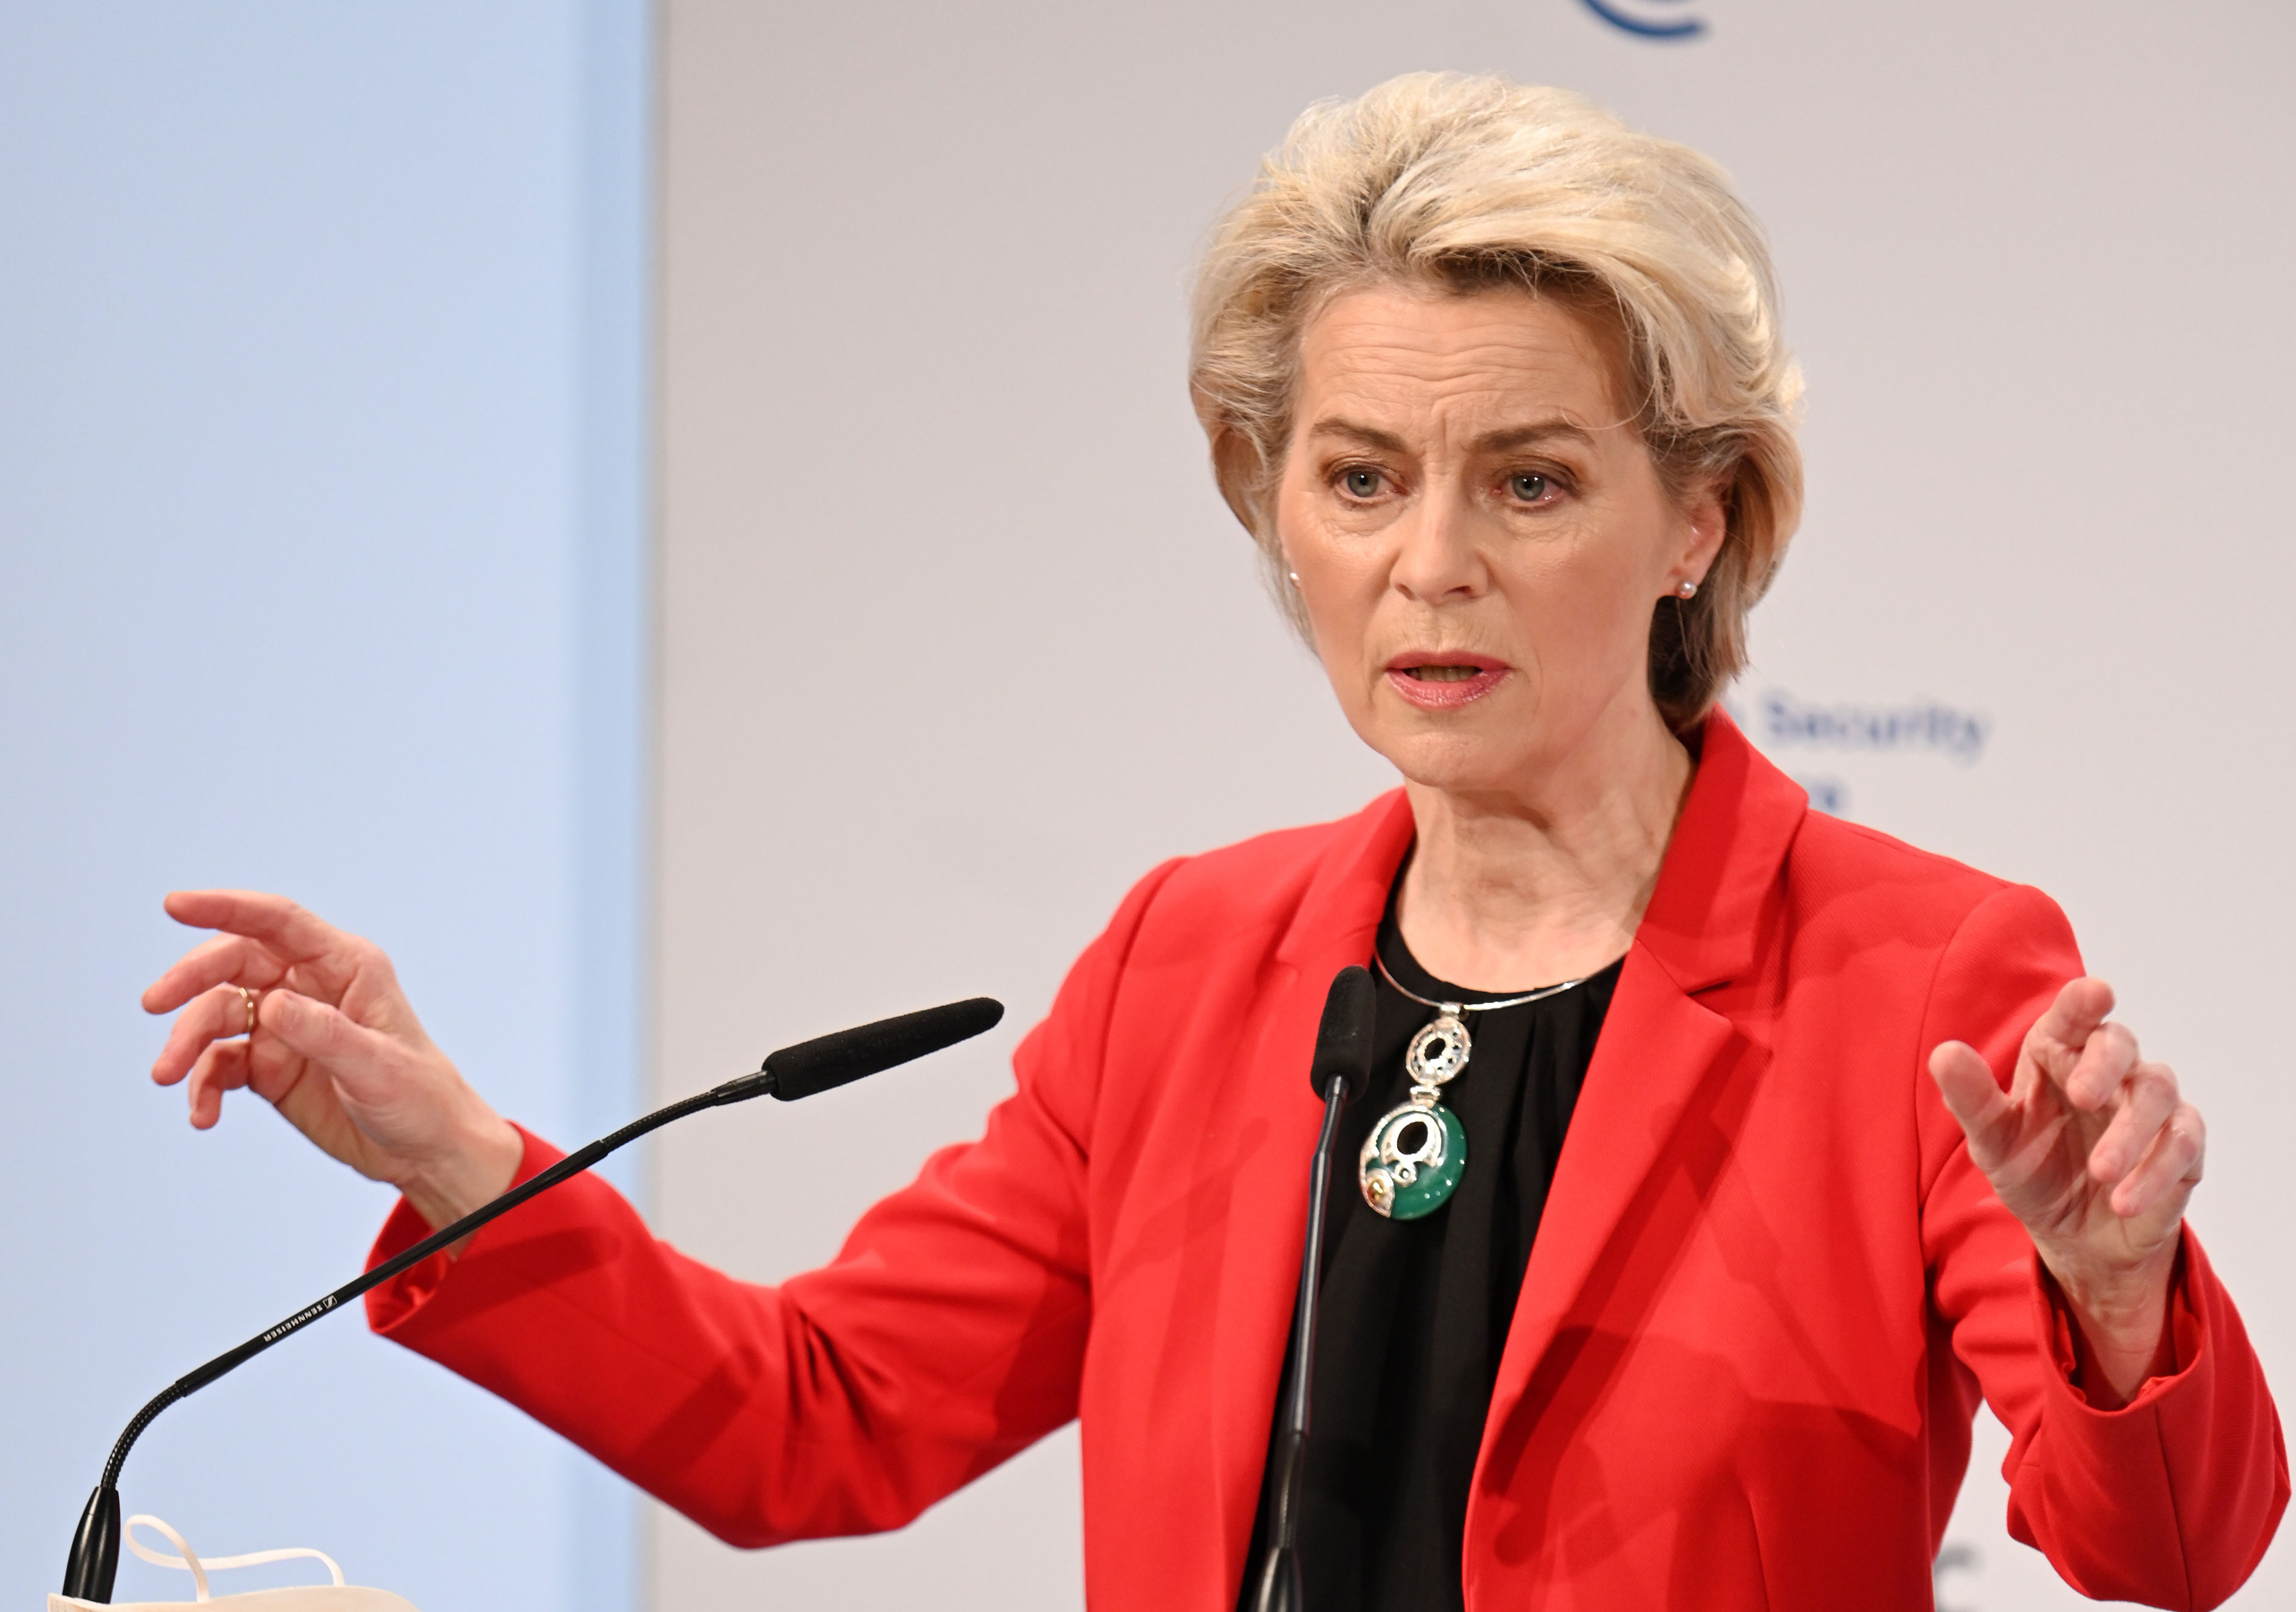 Ursula von der Leyen, President of the European Commission, speaks at the 58th Munich Security Conference. on Feb. 19.